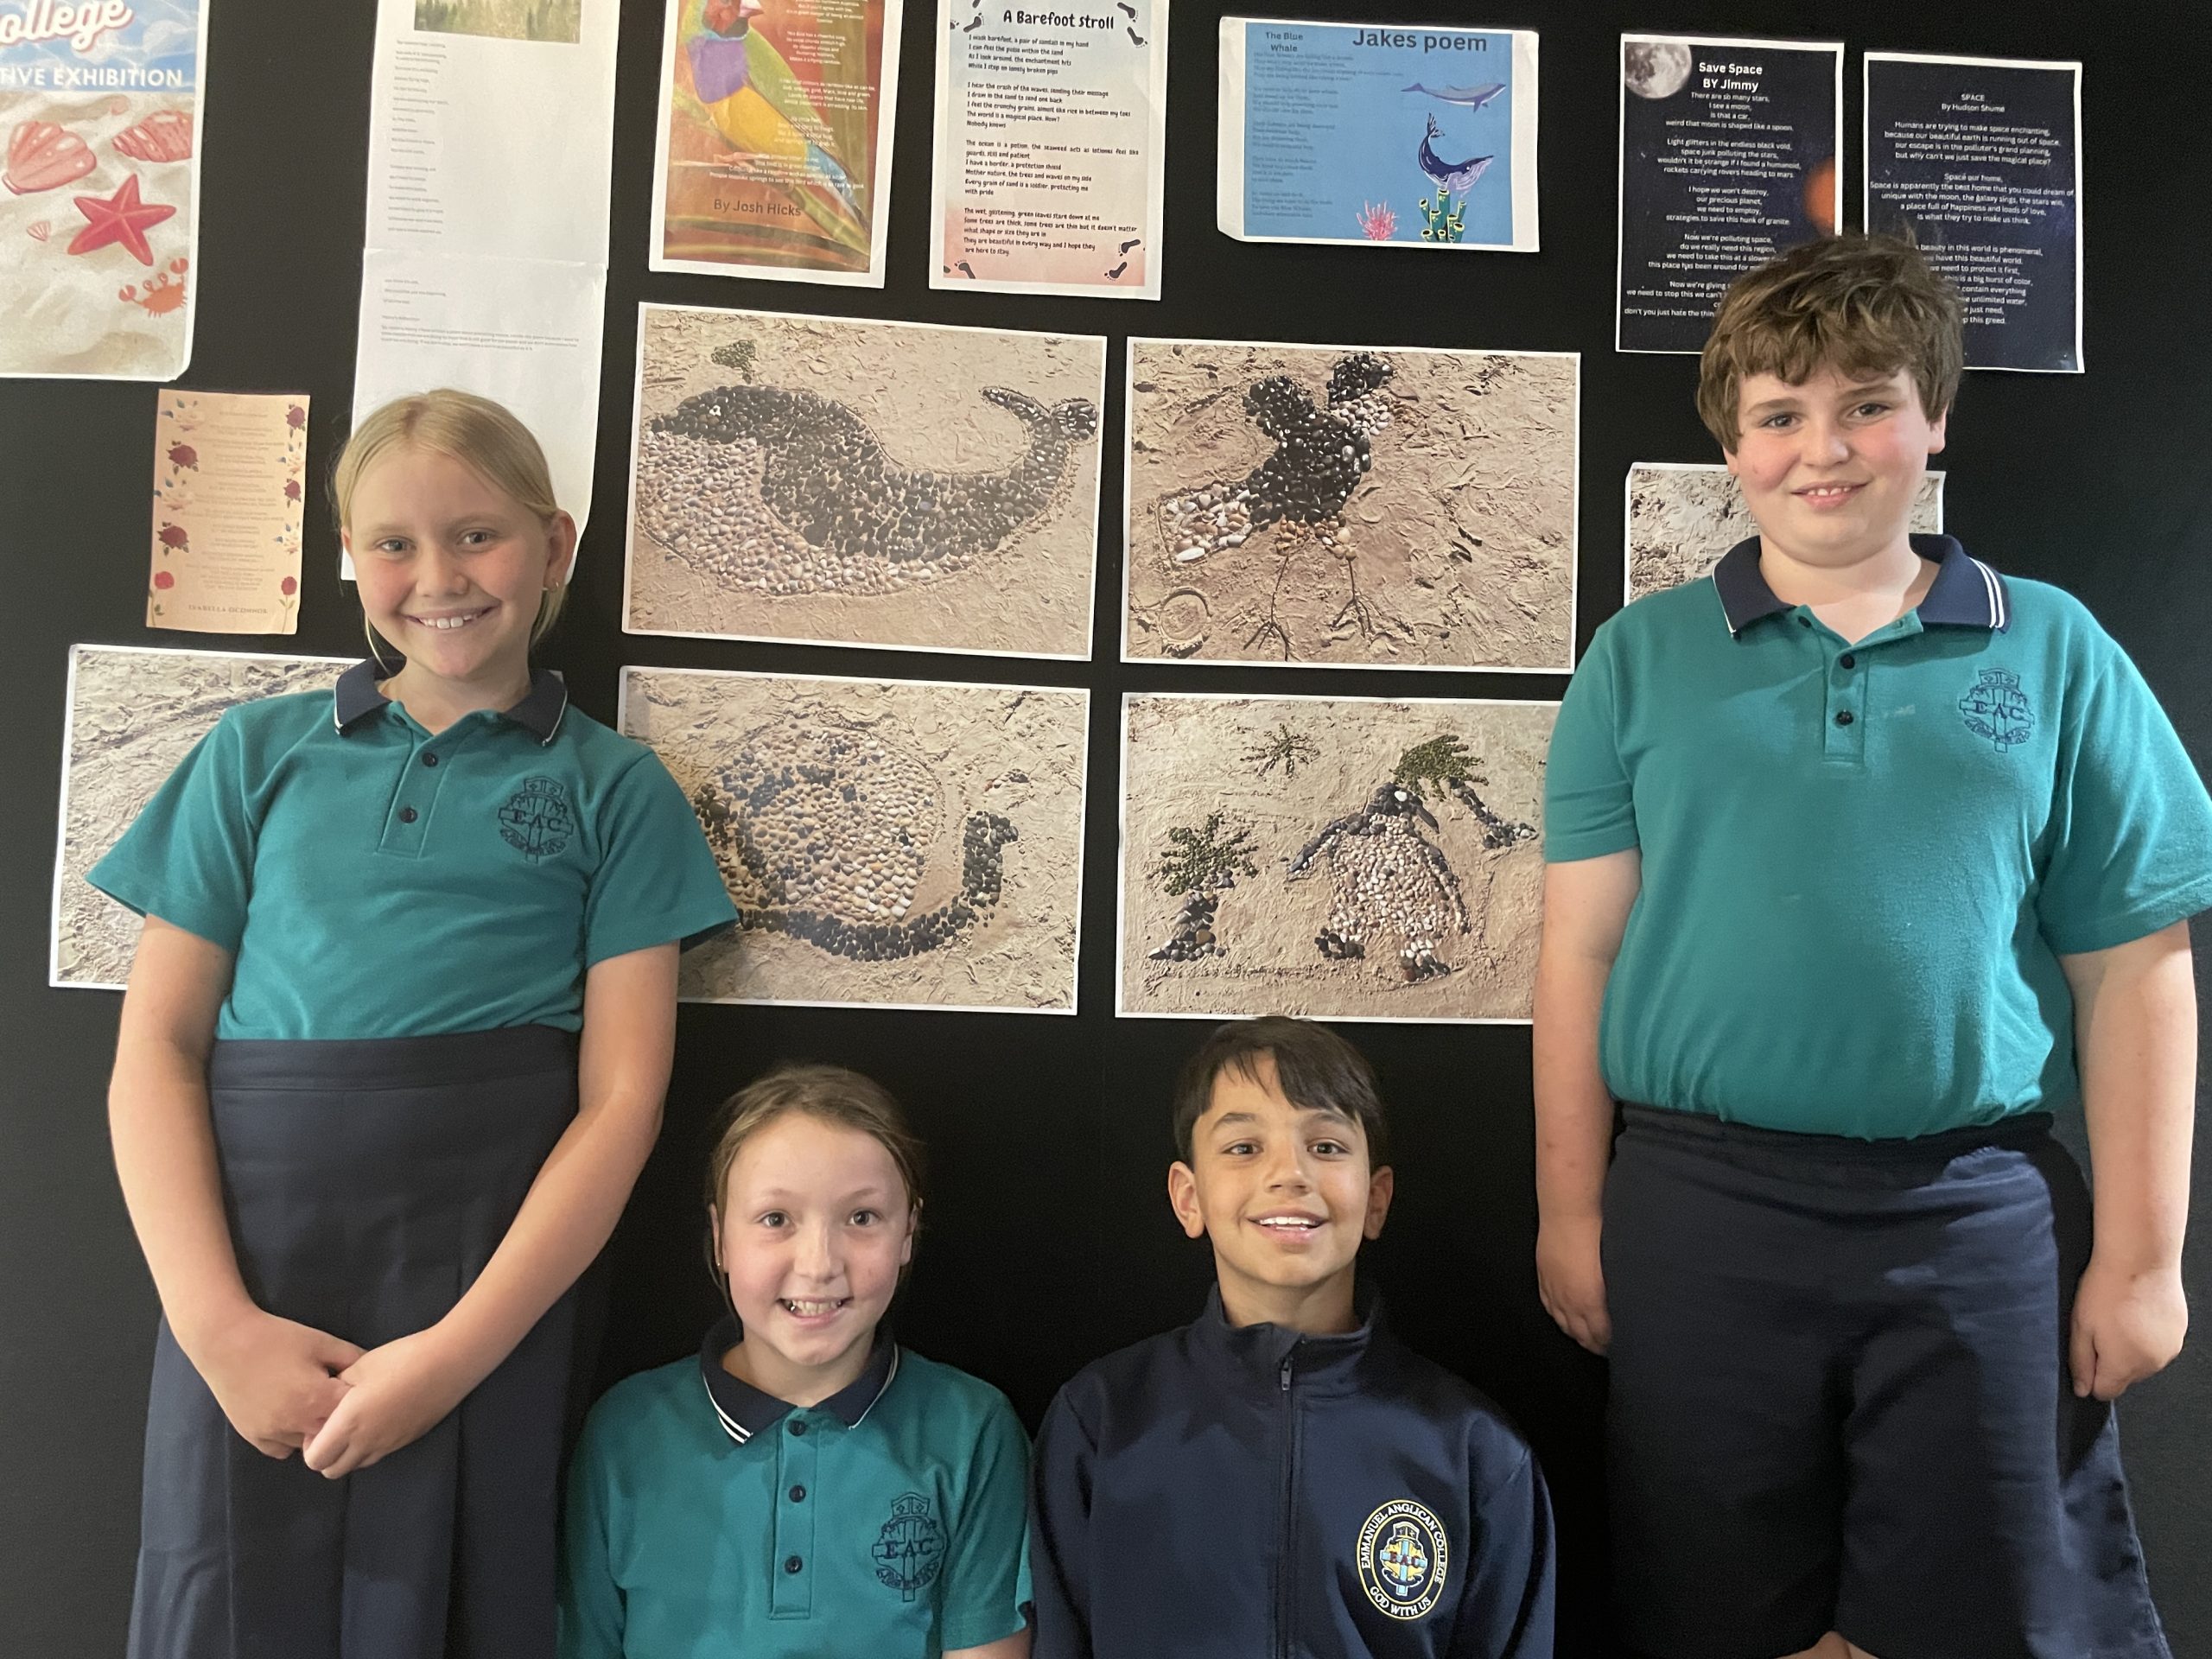 Year 4 Students and their work L to R: Mya Van Den Hoek, Florence Percival, Vic Pilkington and Joshua Hicks